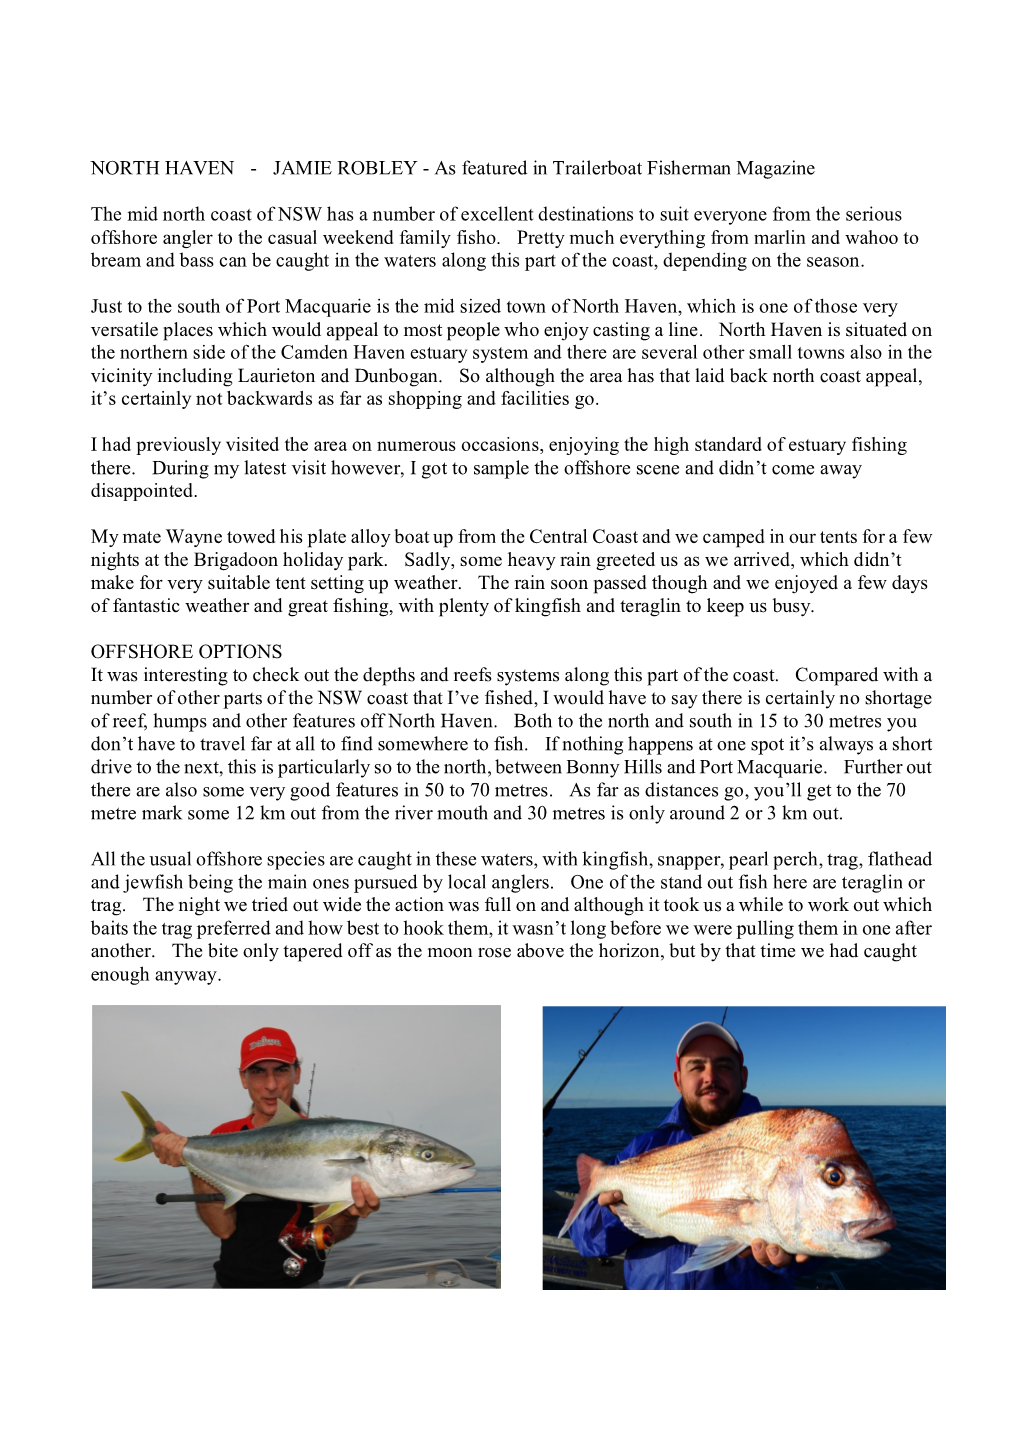 NORTH HAVEN - JAMIE ROBLEY - As Featured in Trailerboat Fisherman Magazine